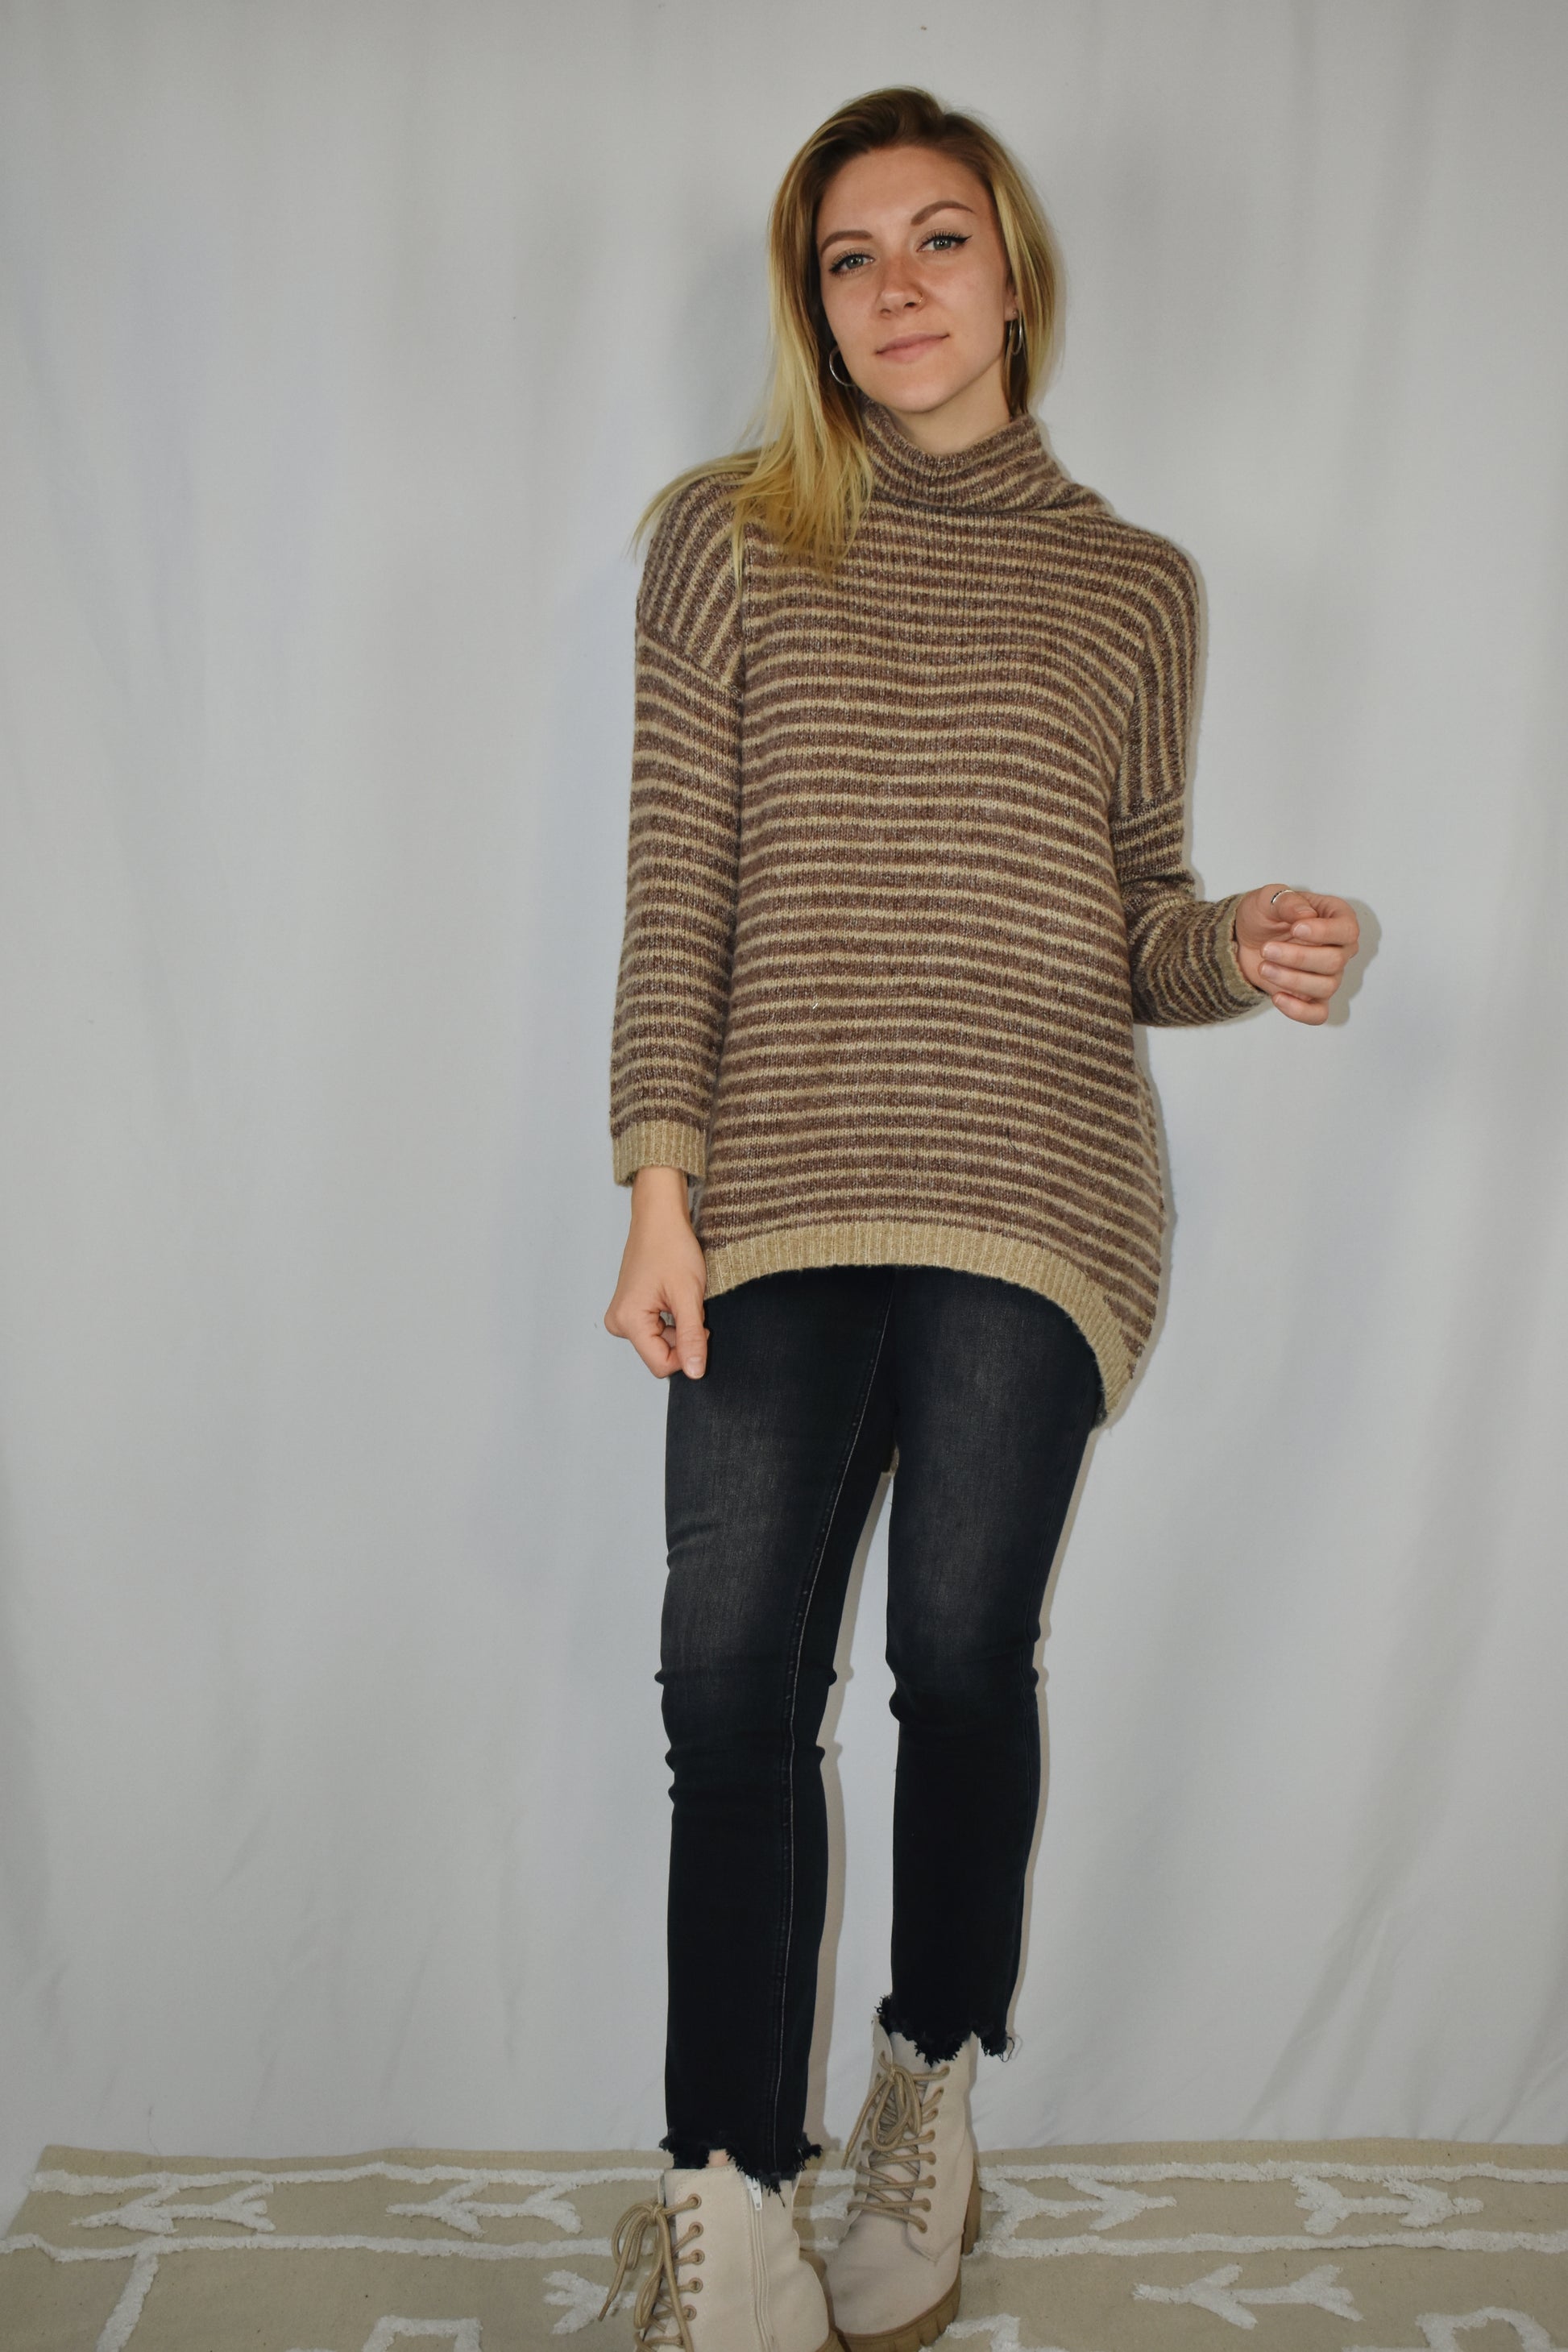 Pullover turtleneck striped sweater. Drop shoulder long sleeves, ribbed hem and sleeve cuffs, and high-low rounded hem. Dark mocha and taupe color.